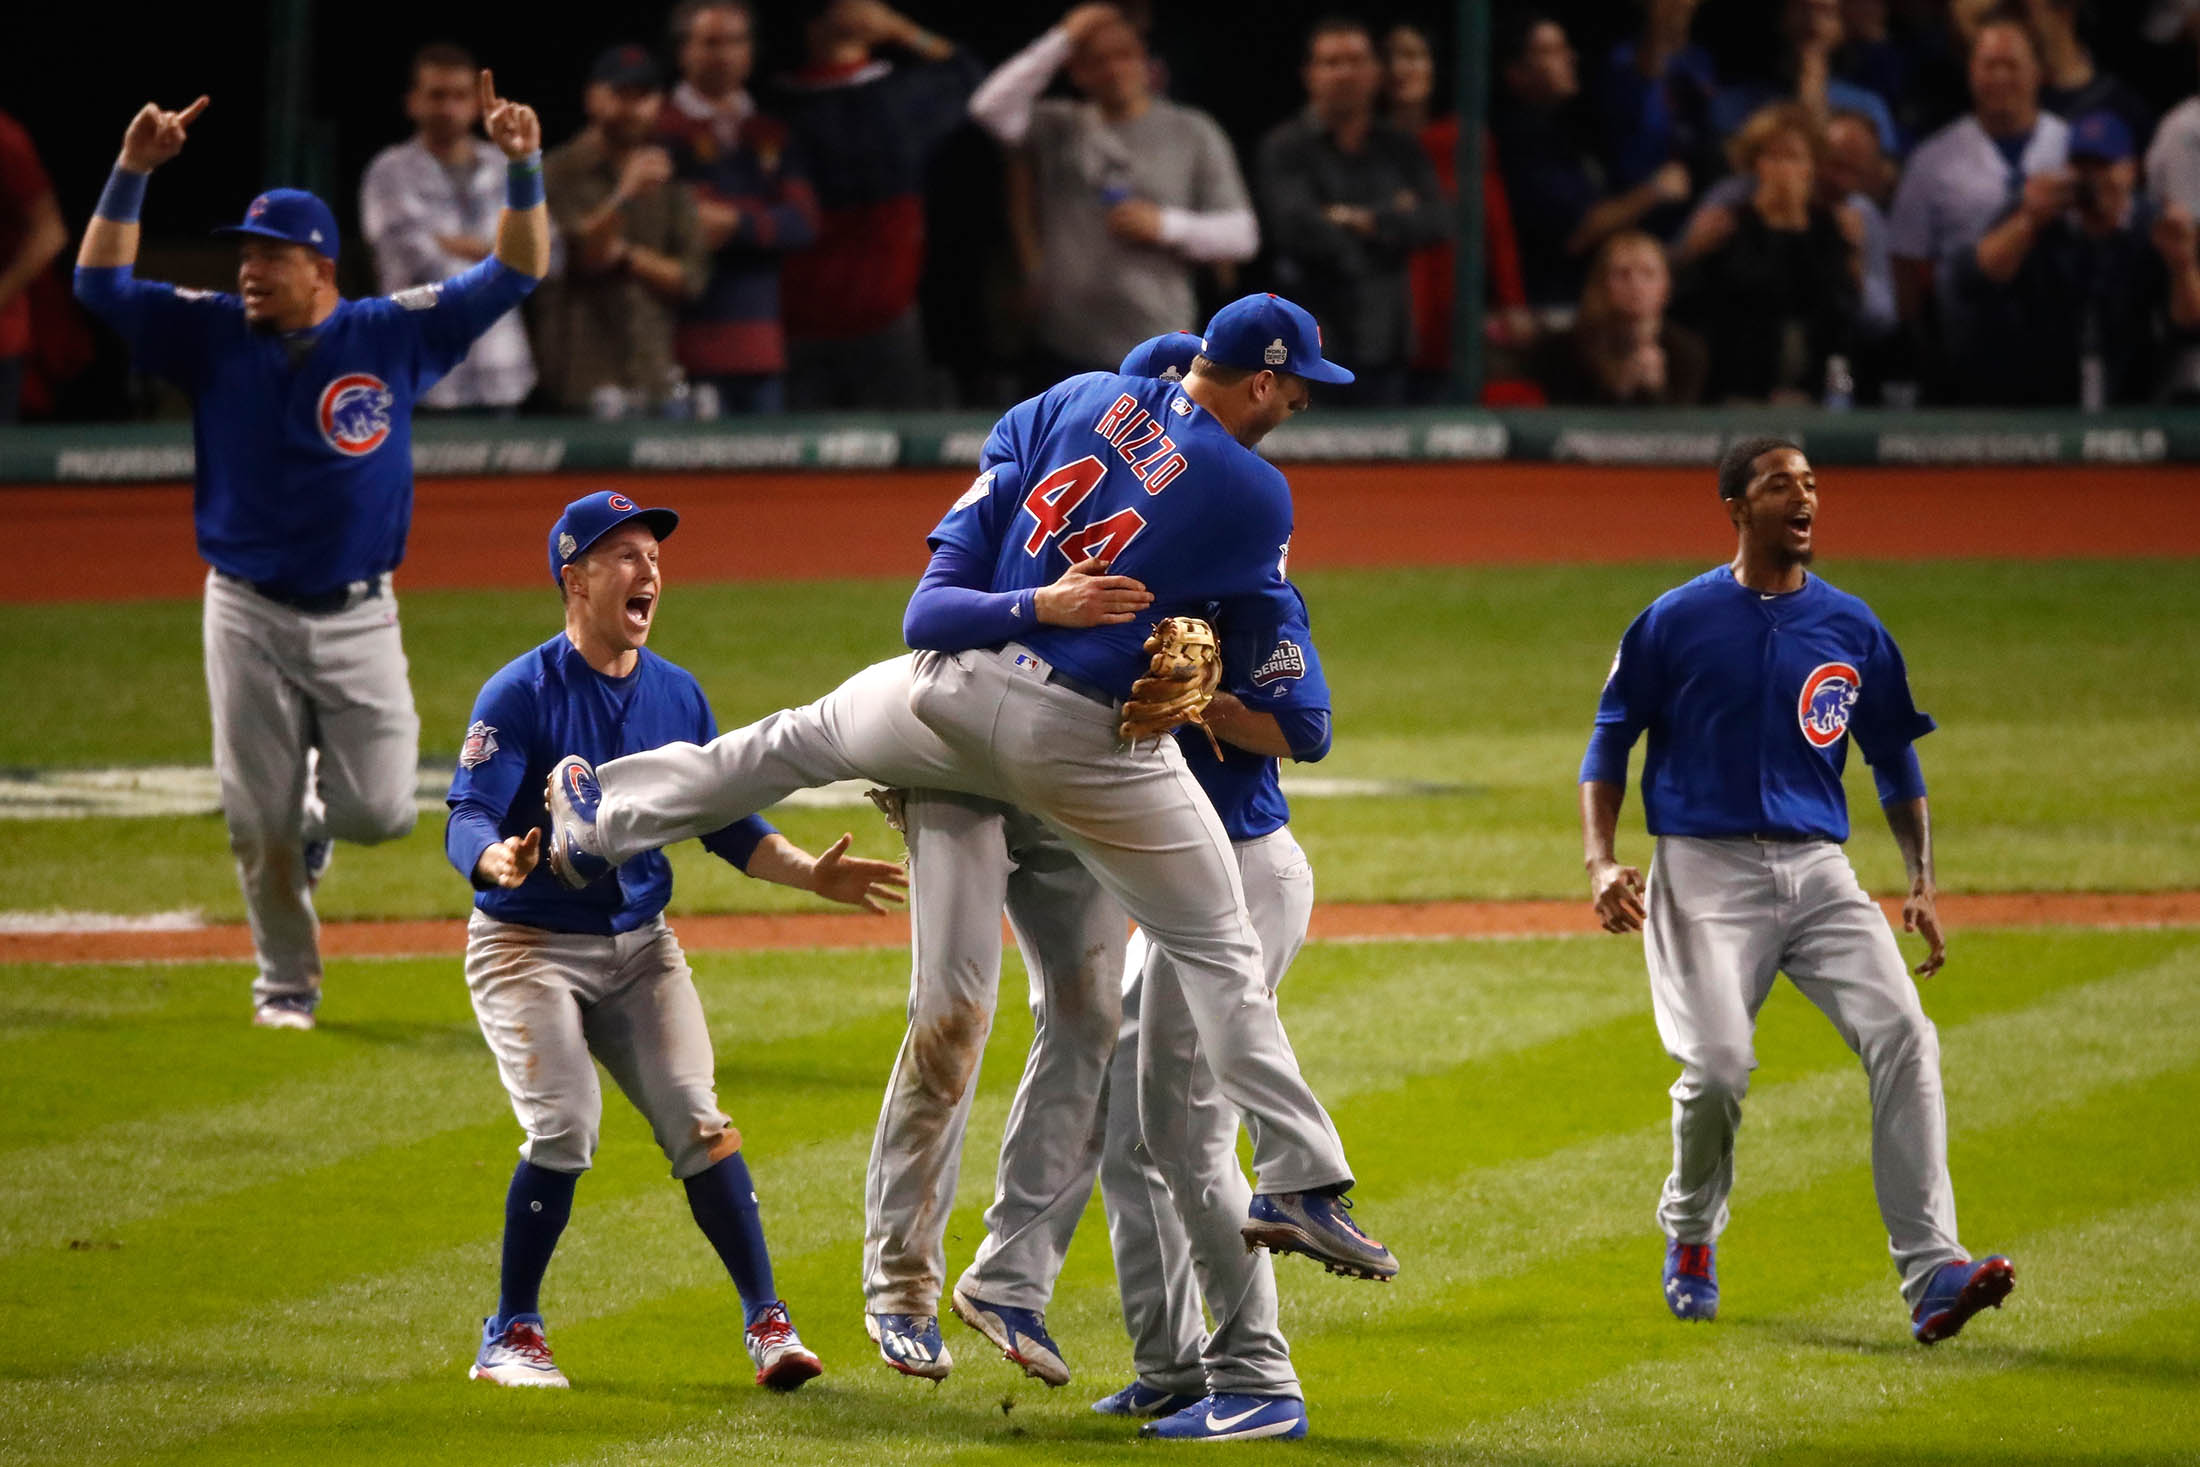 Cubs win World Series with Game 7 win 